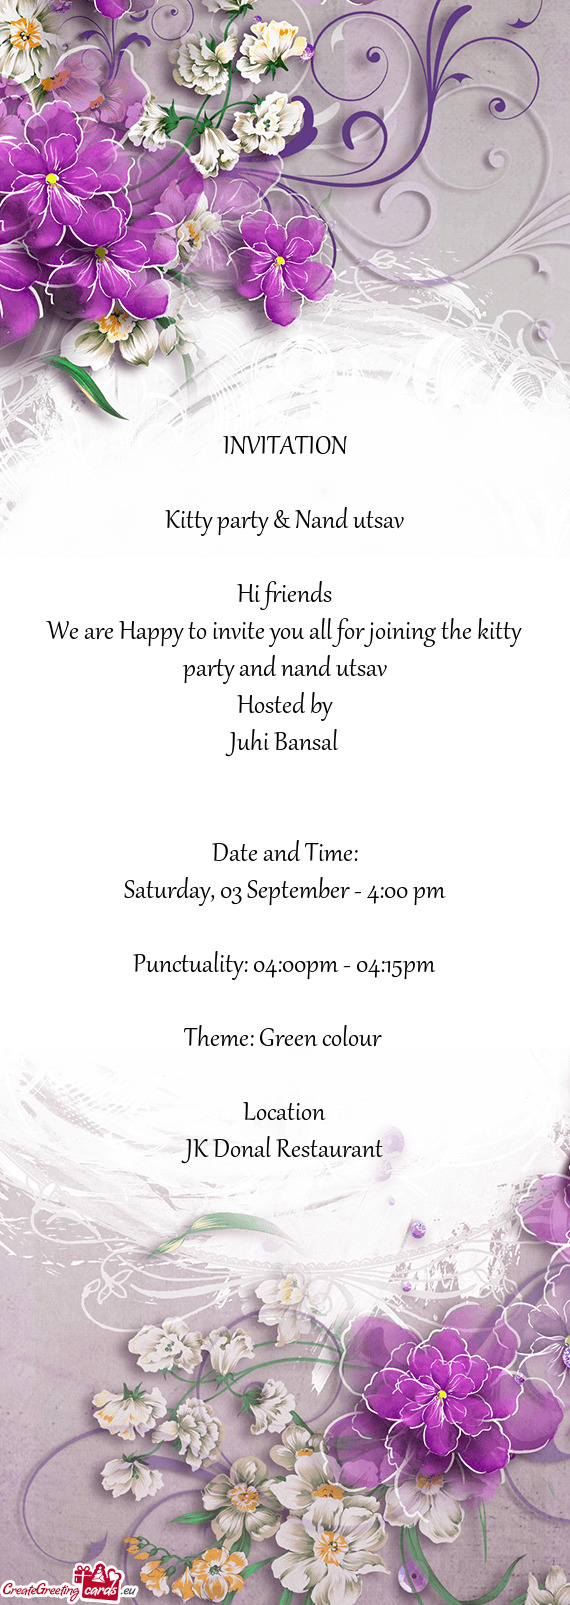 We are Happy to invite you all for joining the kitty party and nand utsav